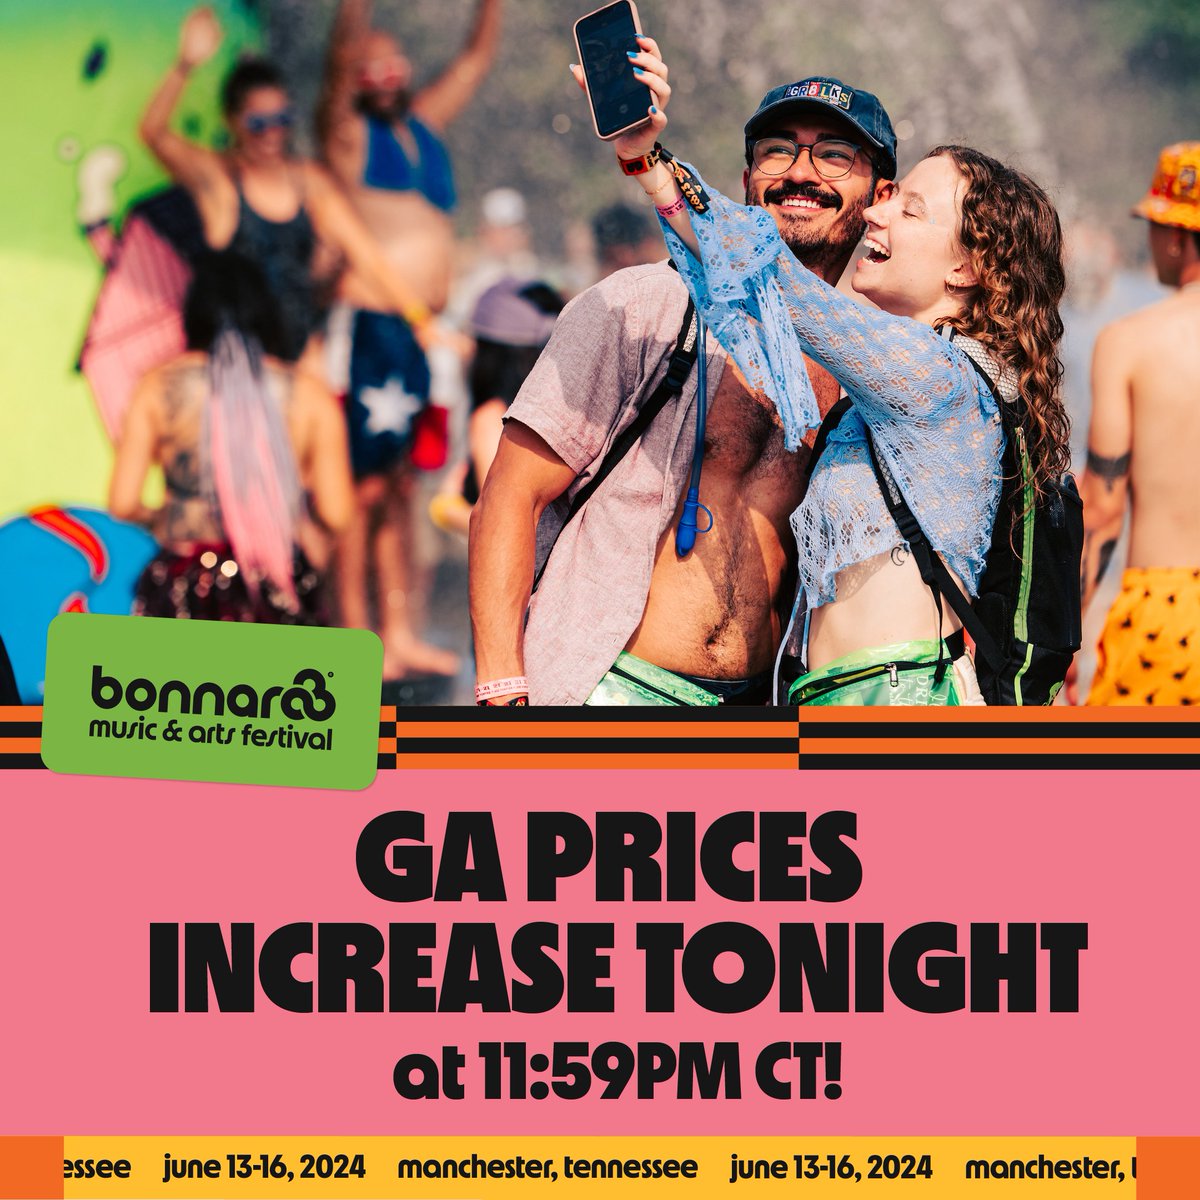 snag a ticket to the farm at the lowest possible price before midnight! bonnaroo.com/tickets